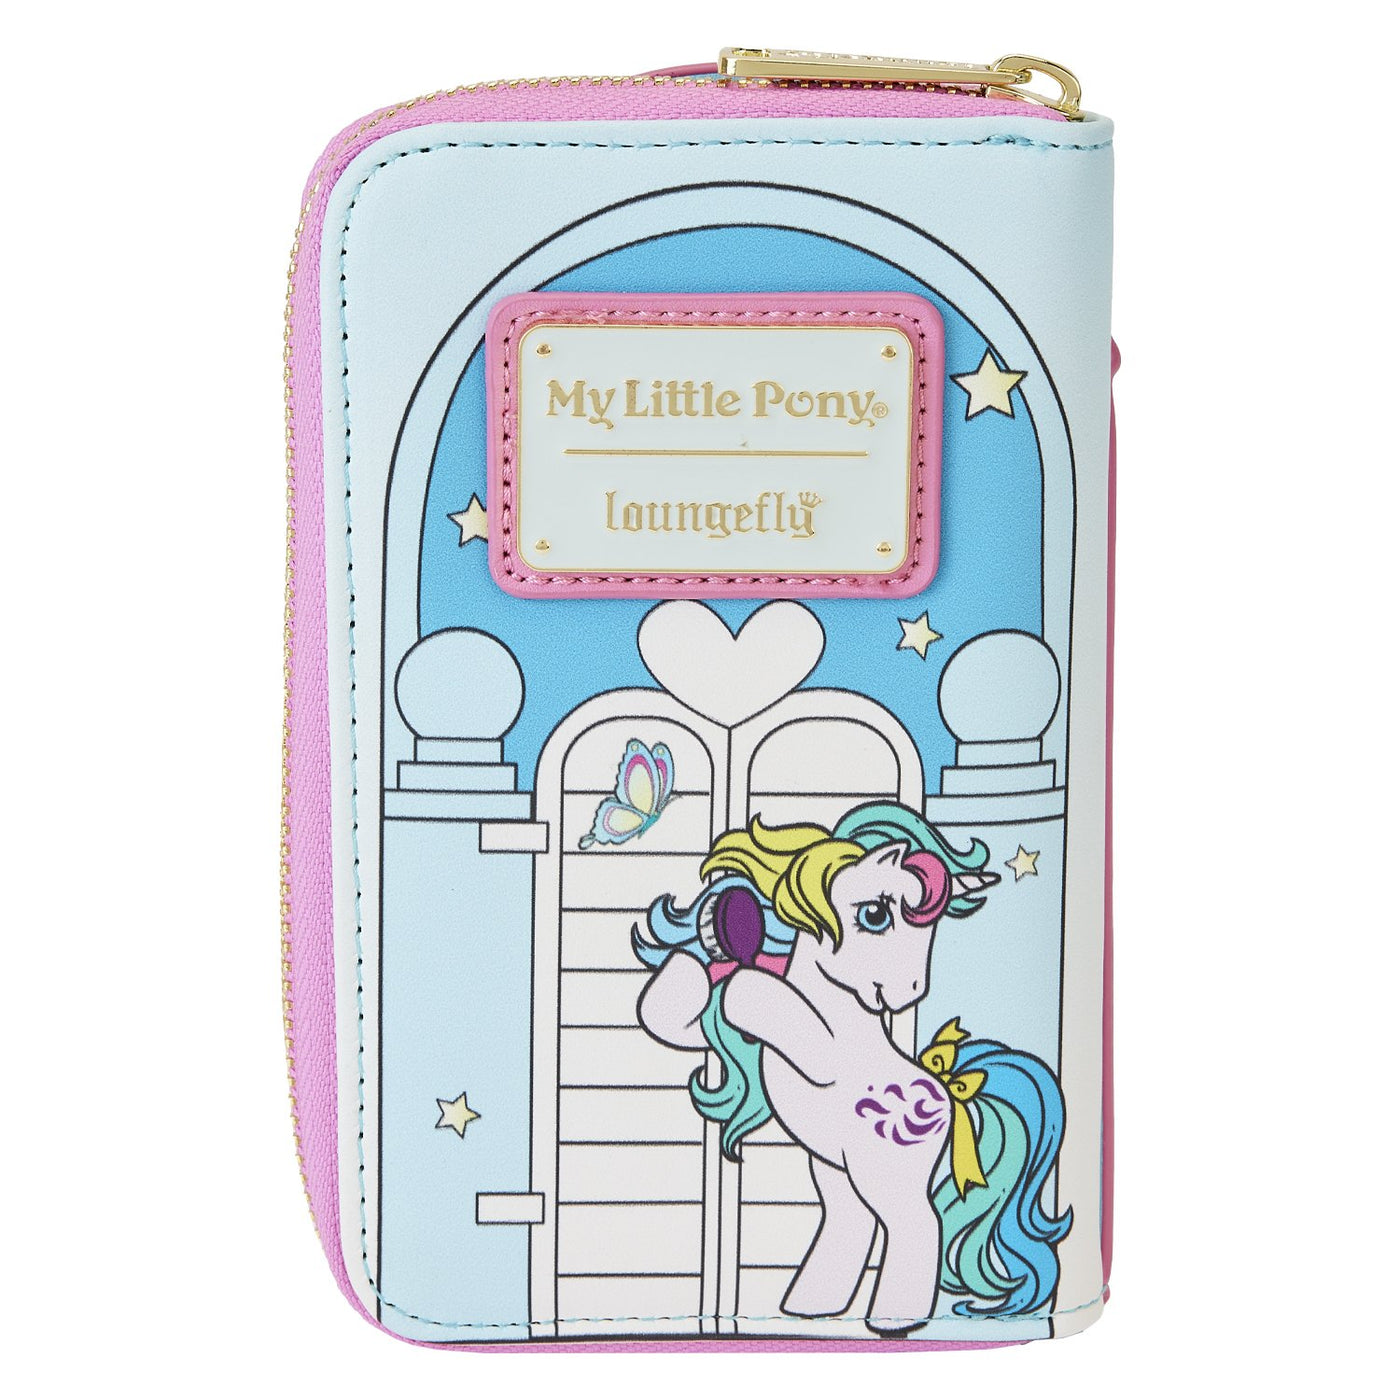 671803456143 - Loungefly Hasbro My Little Pony 40th Anniversary Pretty Parlor Zip-Around Wallet - Back